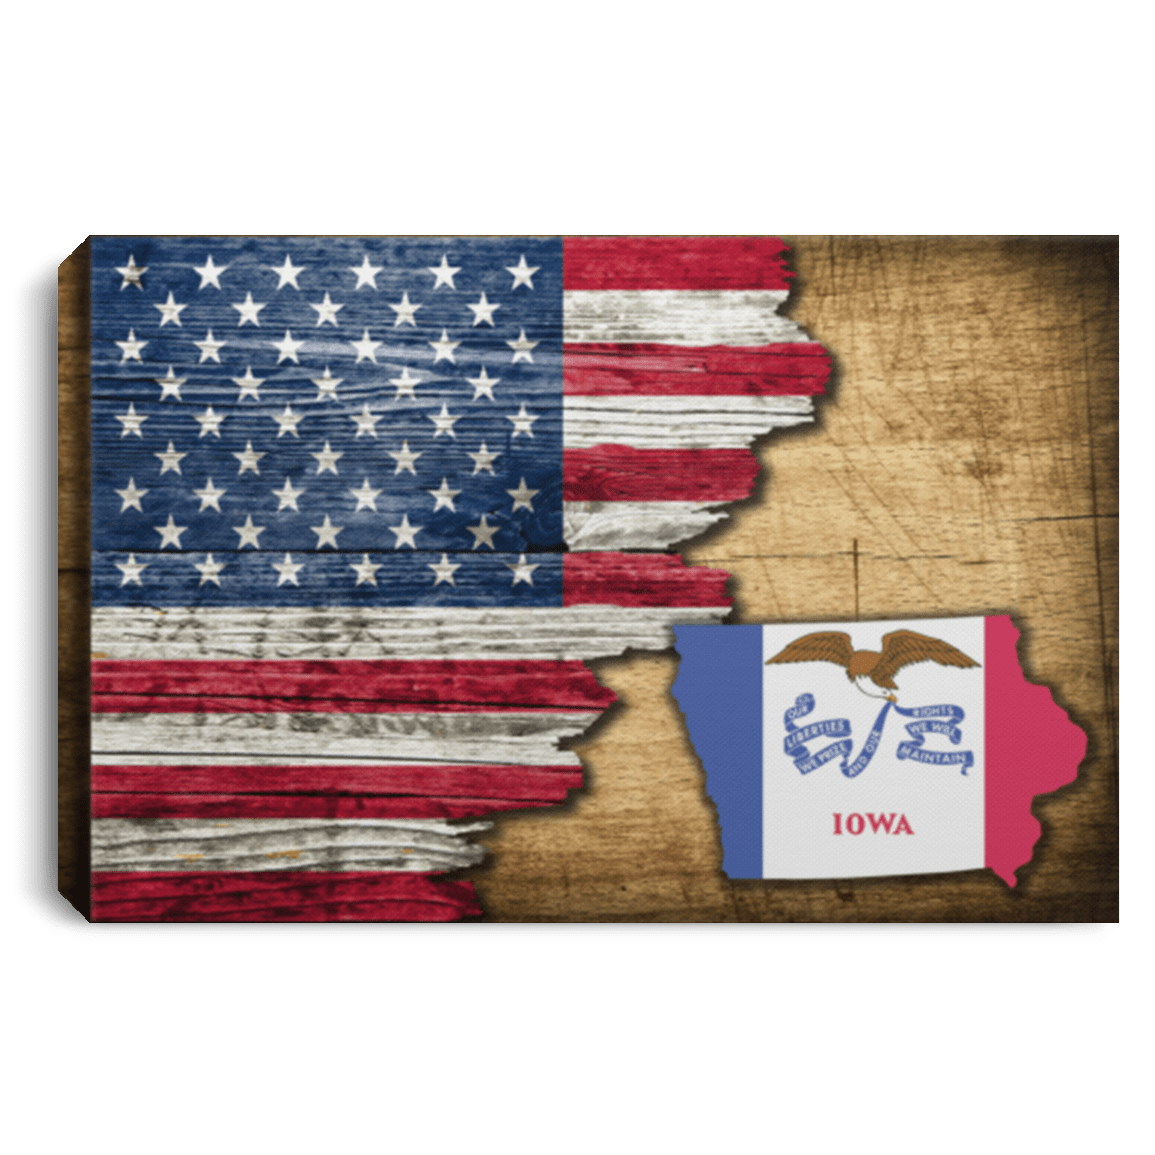 United States/Iowa Flag Ripped Effect 12X8 Inches Landscape Canvas .75In Frame